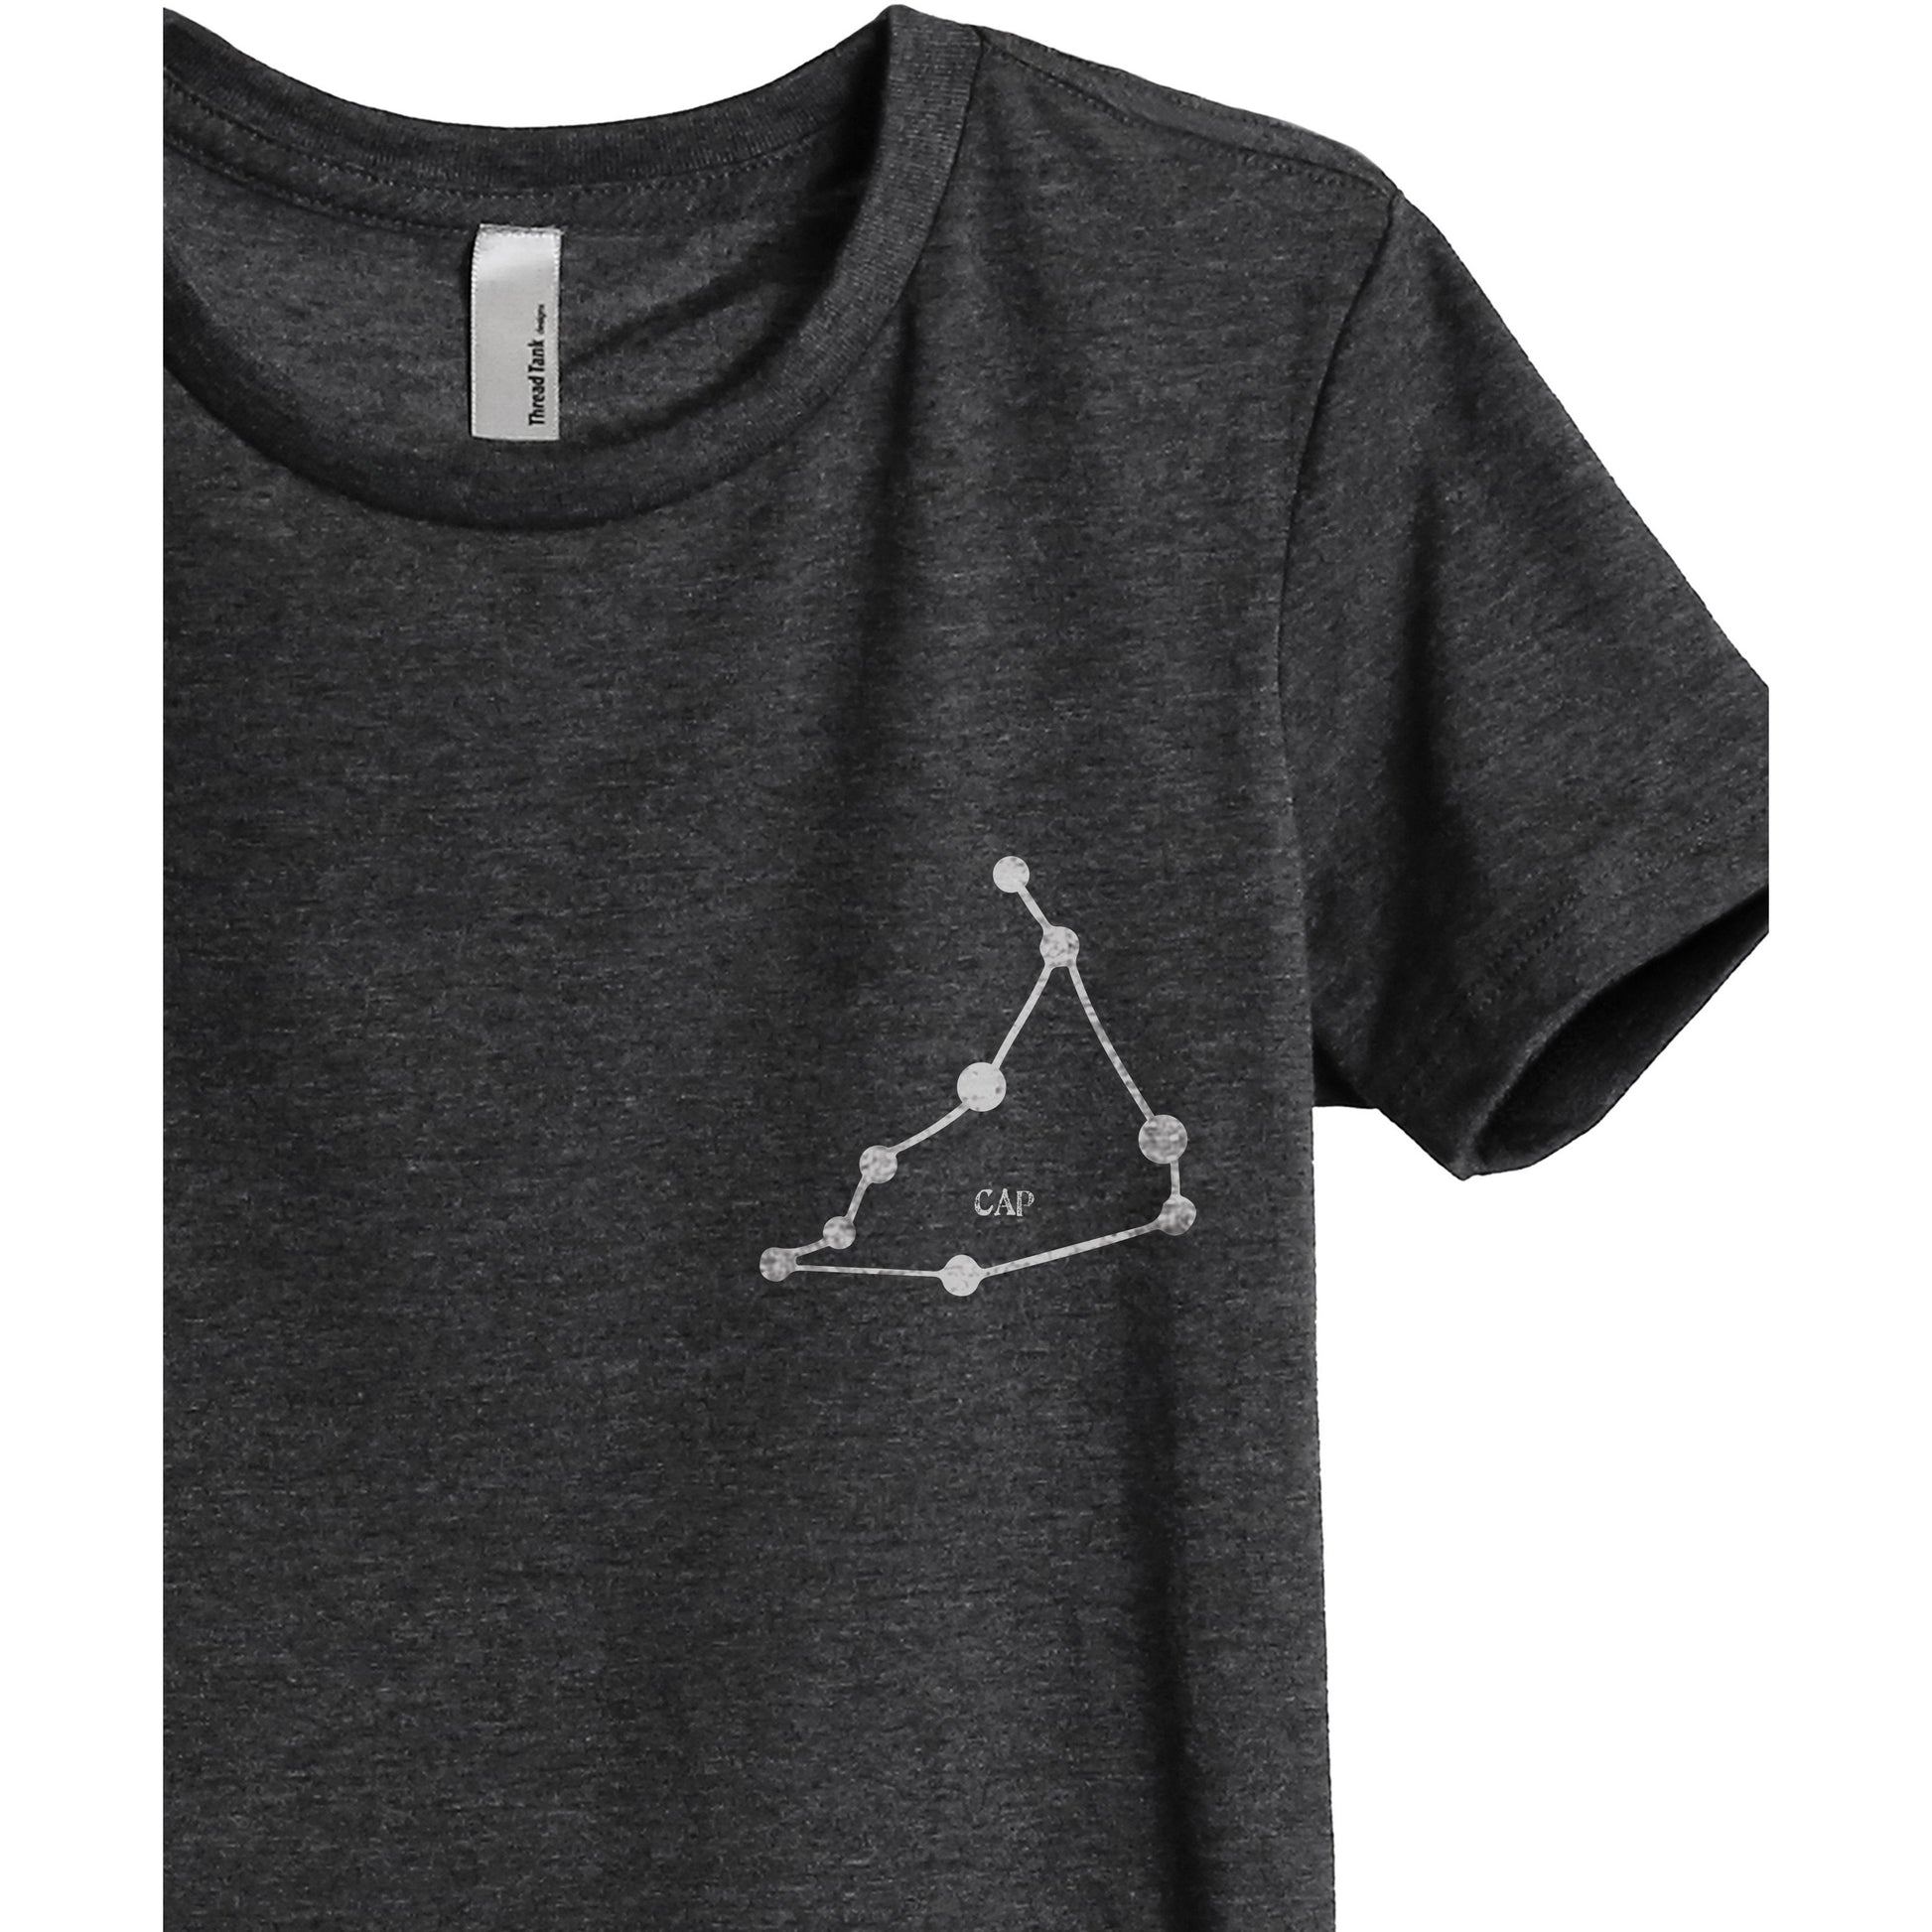 Capricorn CAP Constellation Astrology Women's Relaxed Crewneck T-Shirt Top Tee Charcoal Grey Zoom Details